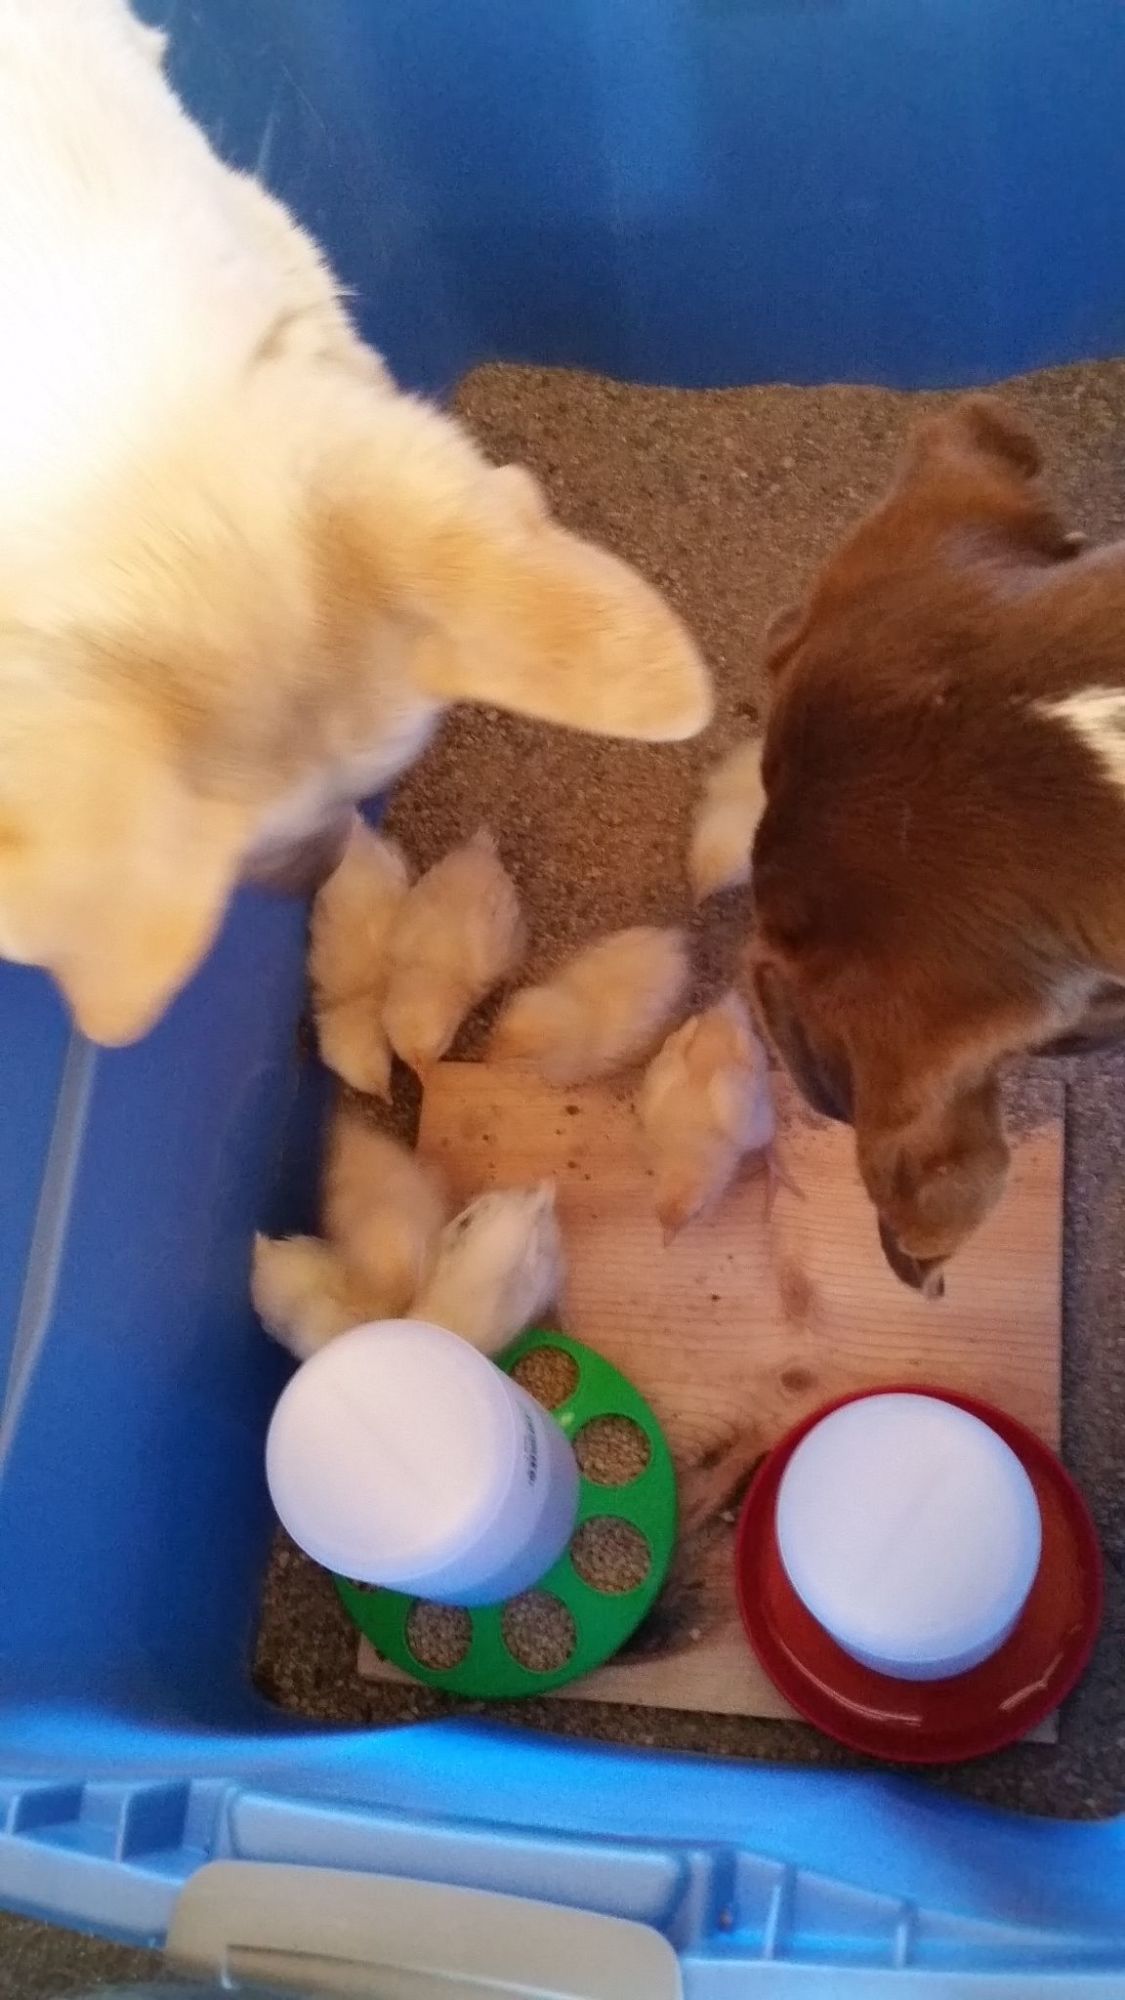 These are my brand new chicks! 4 BO and 4 Light Brahma, 1 week old. My dogs are VERY curious.